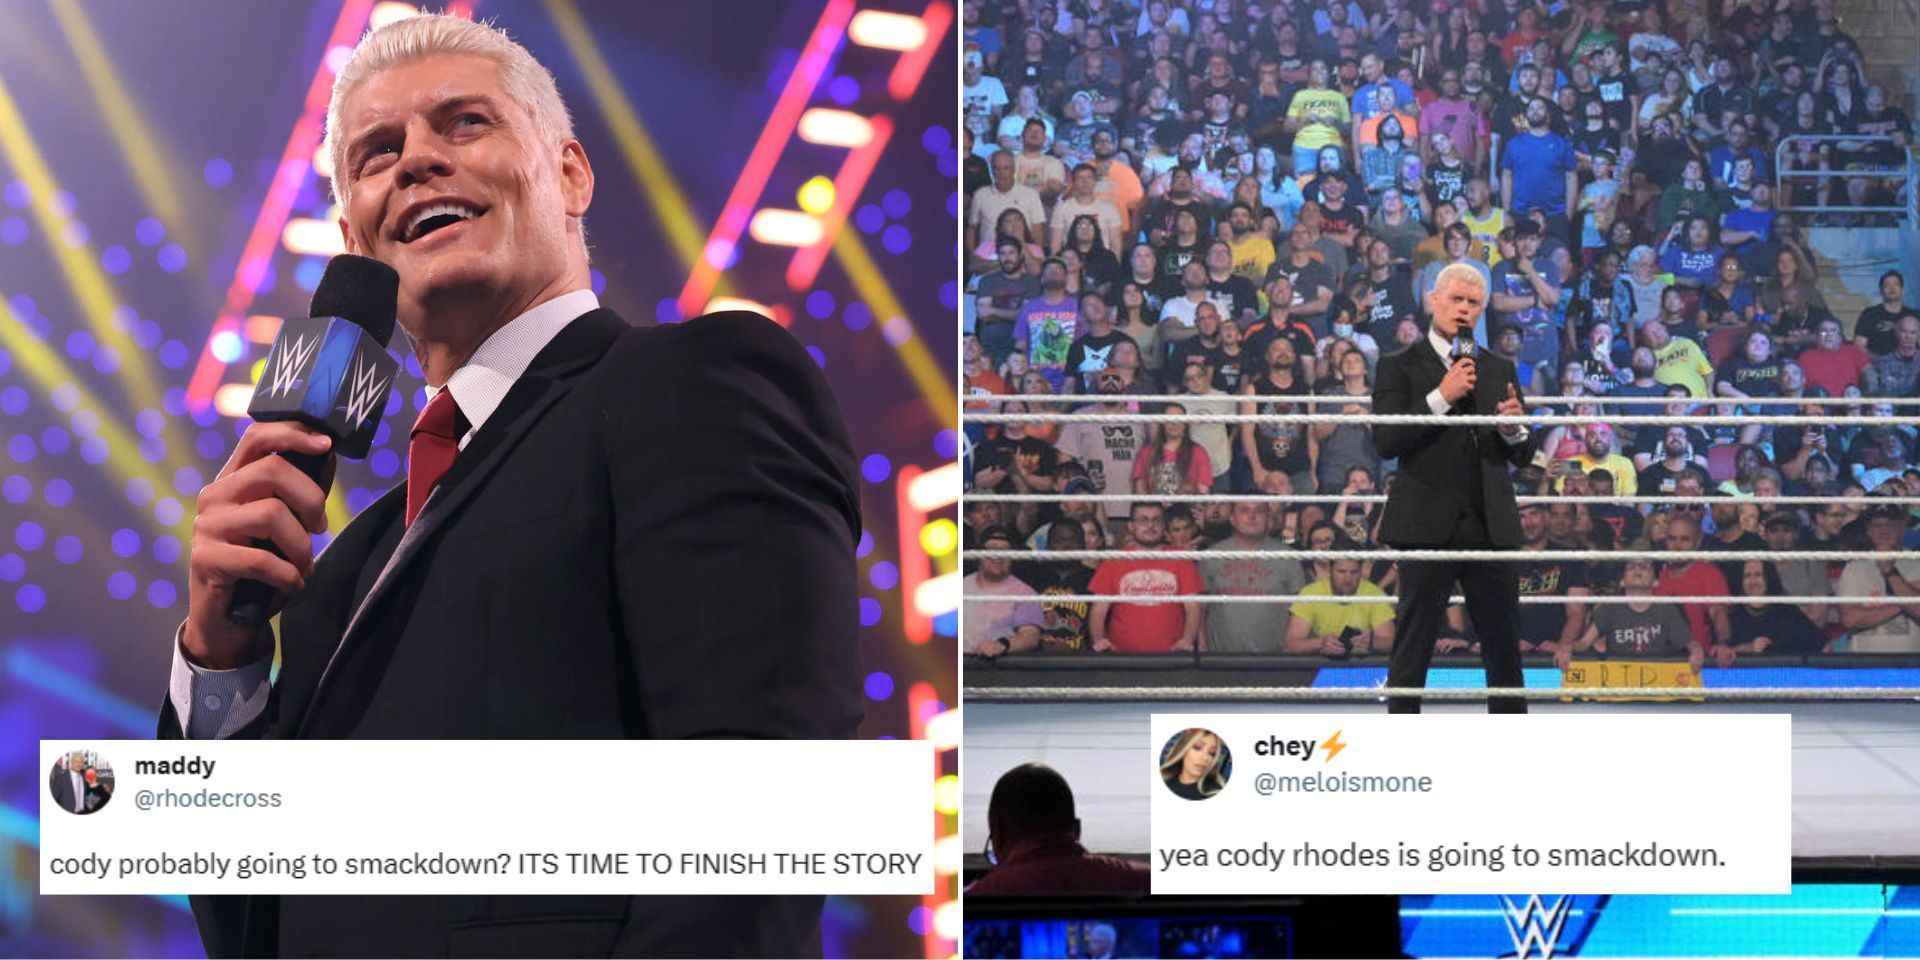 Cody Rhodes could be moving to SmackDown